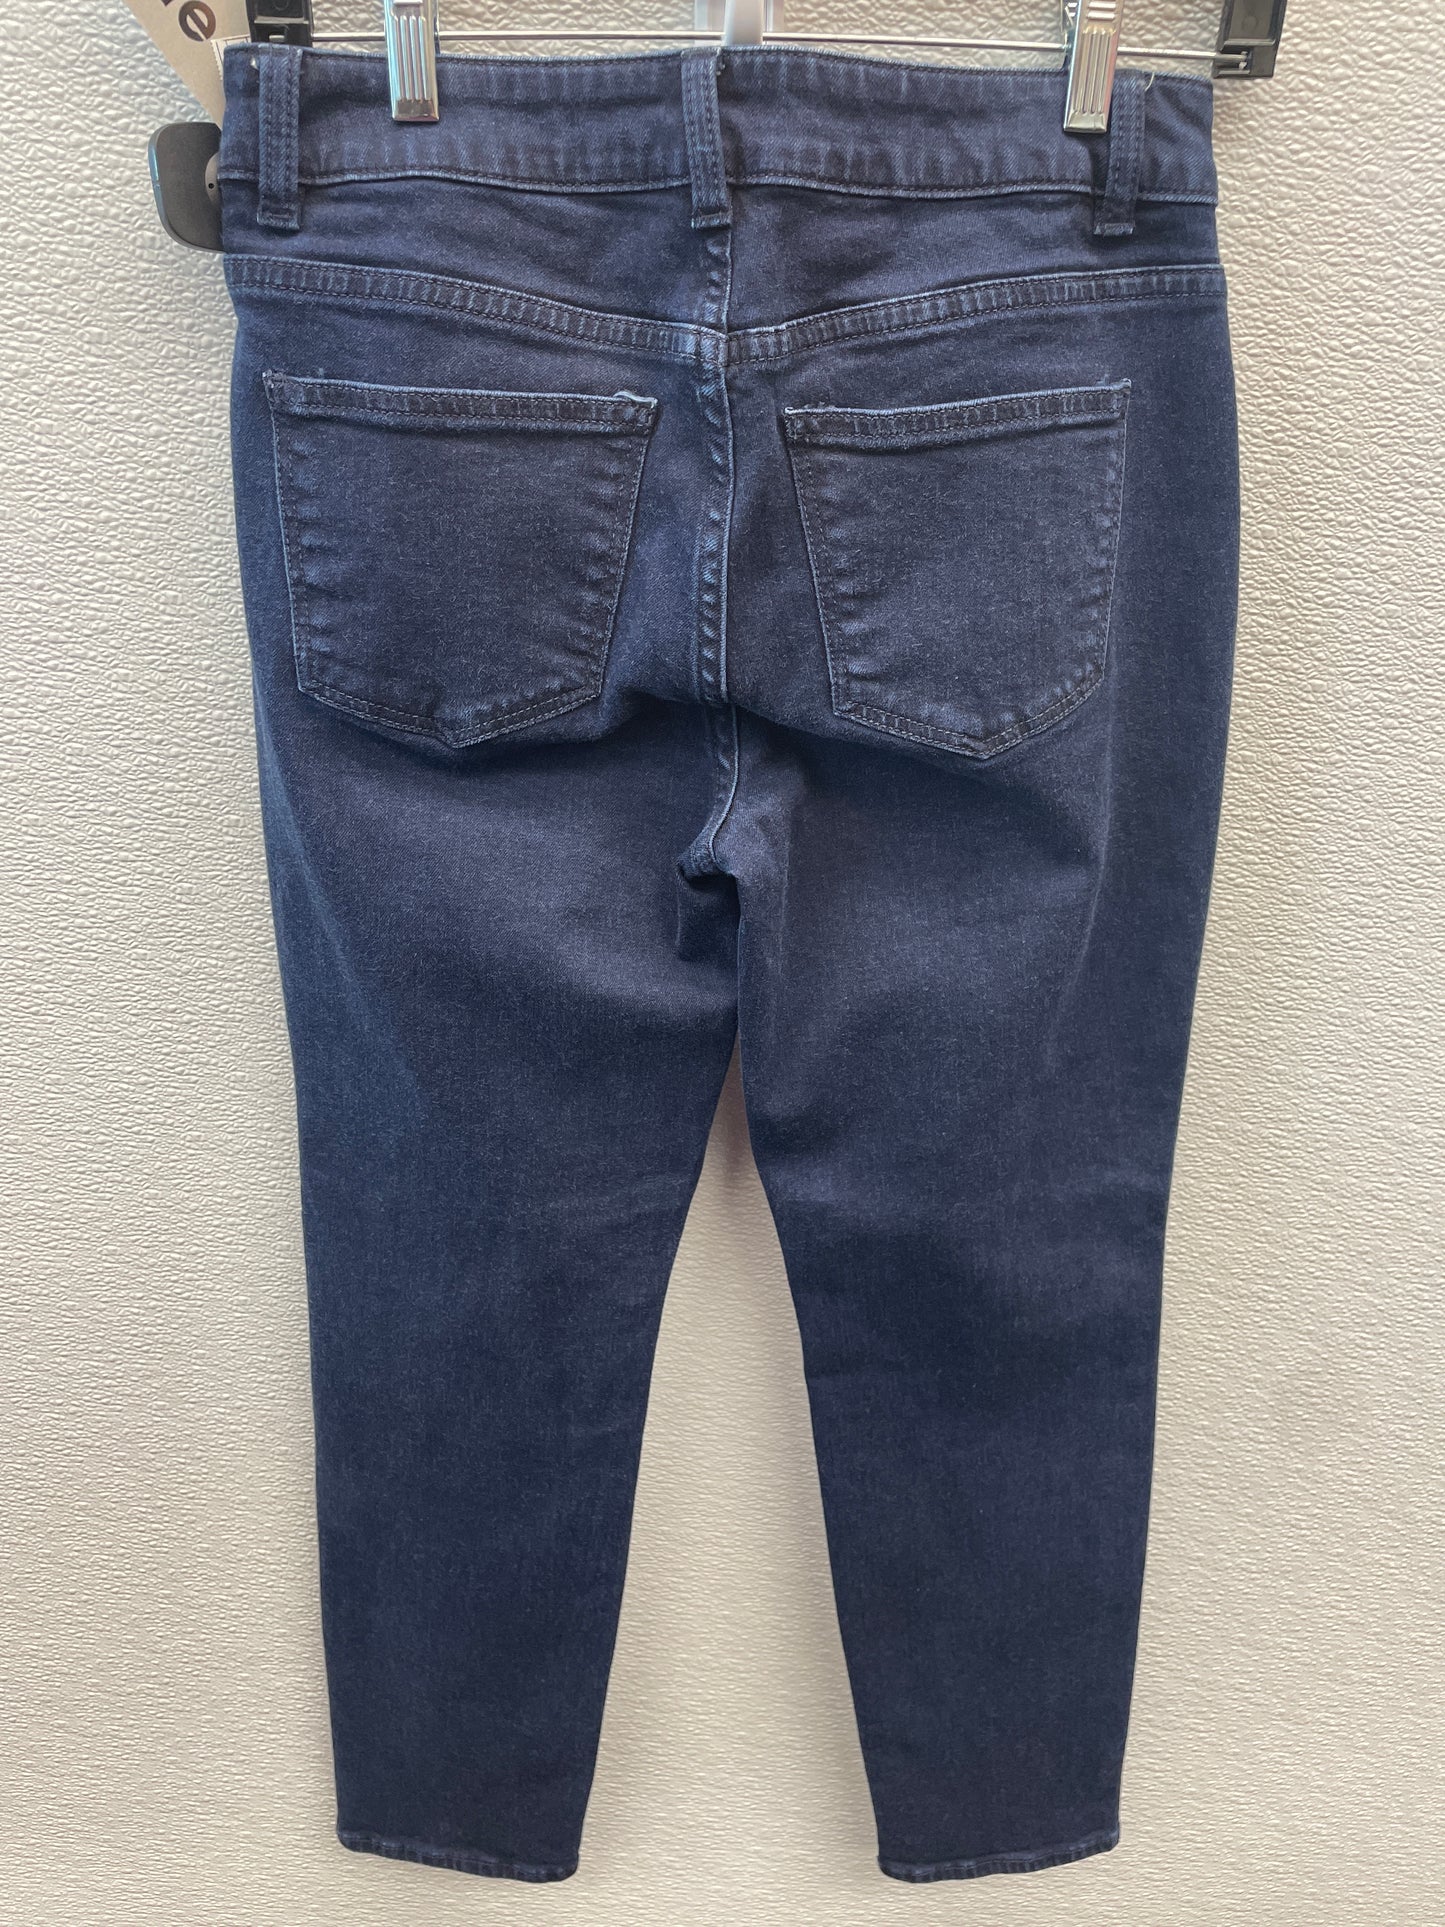 Jeans Skinny By Talbots  Size: 4petite